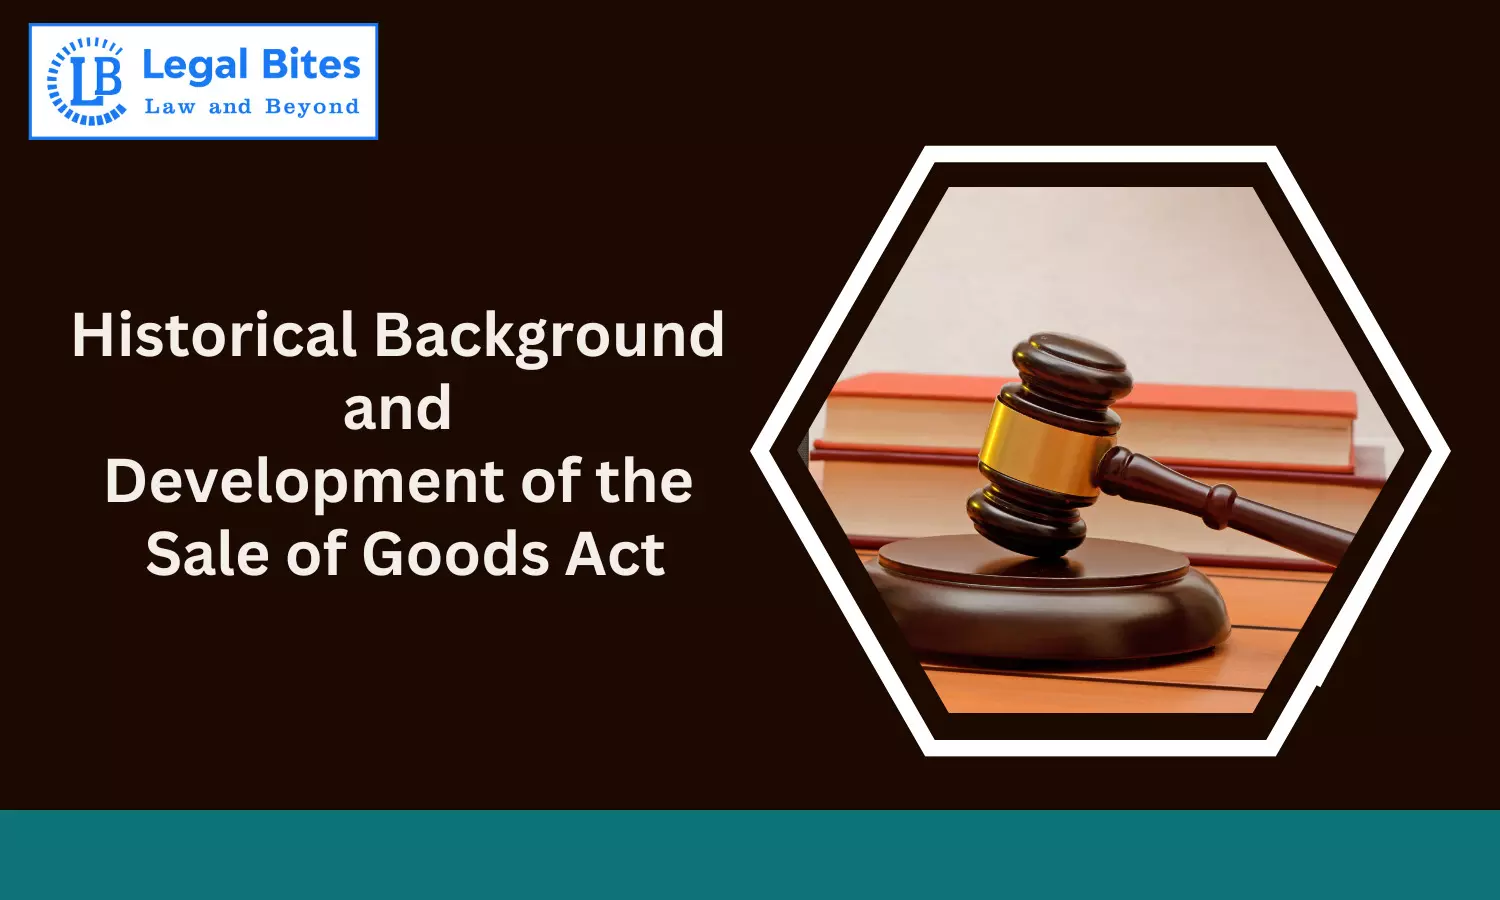 Historical Background and Development of the Sale of Goods Act